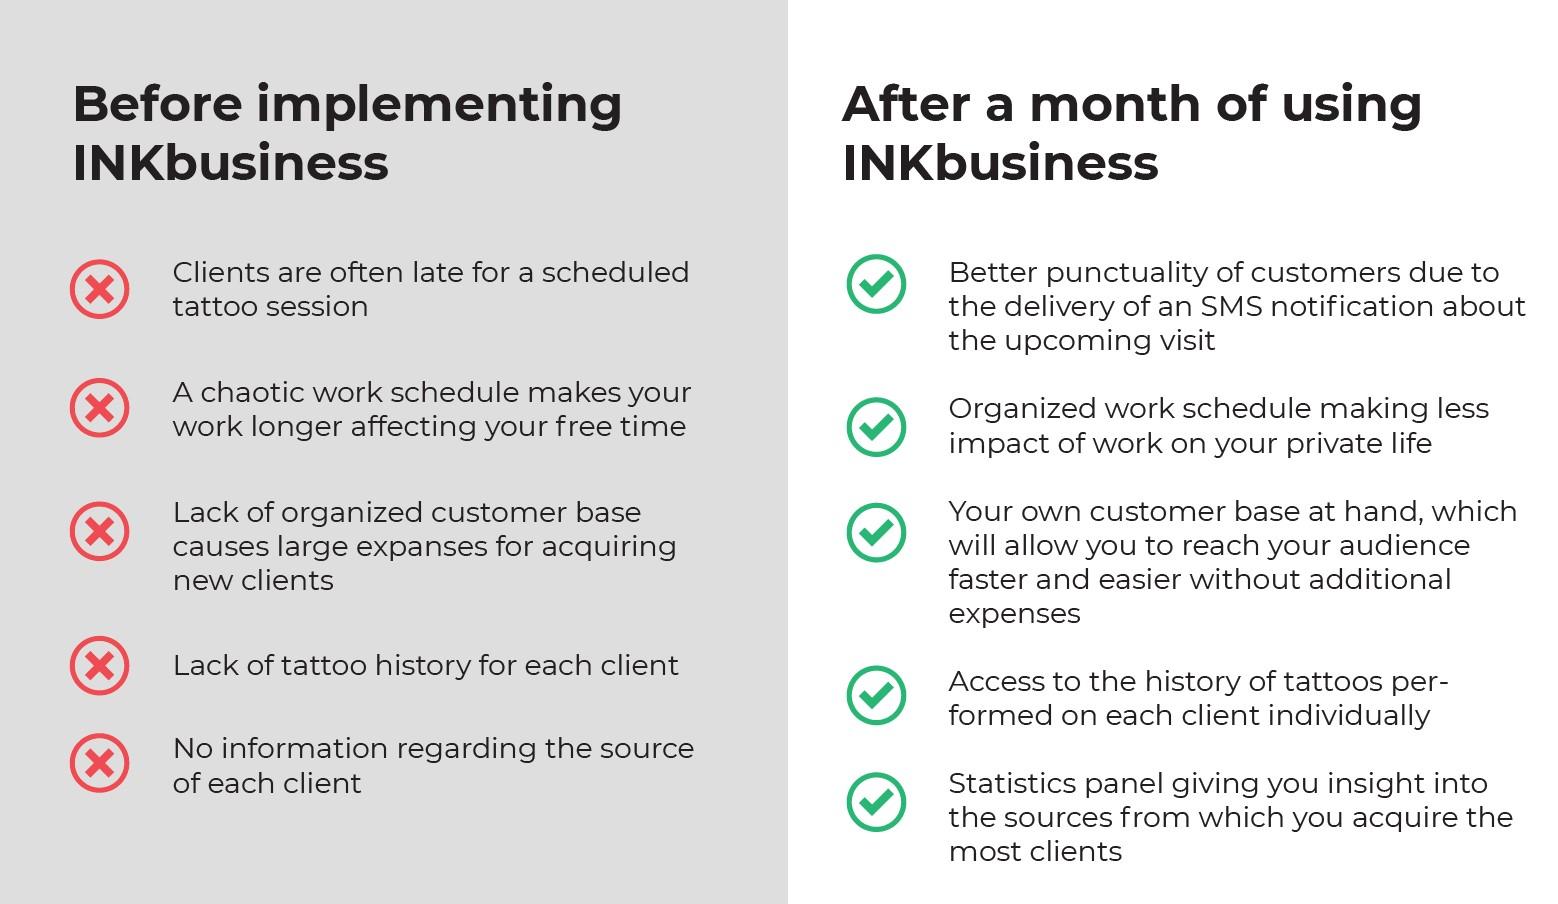 "We are changing for you!"  - See what's new in INKbusiness